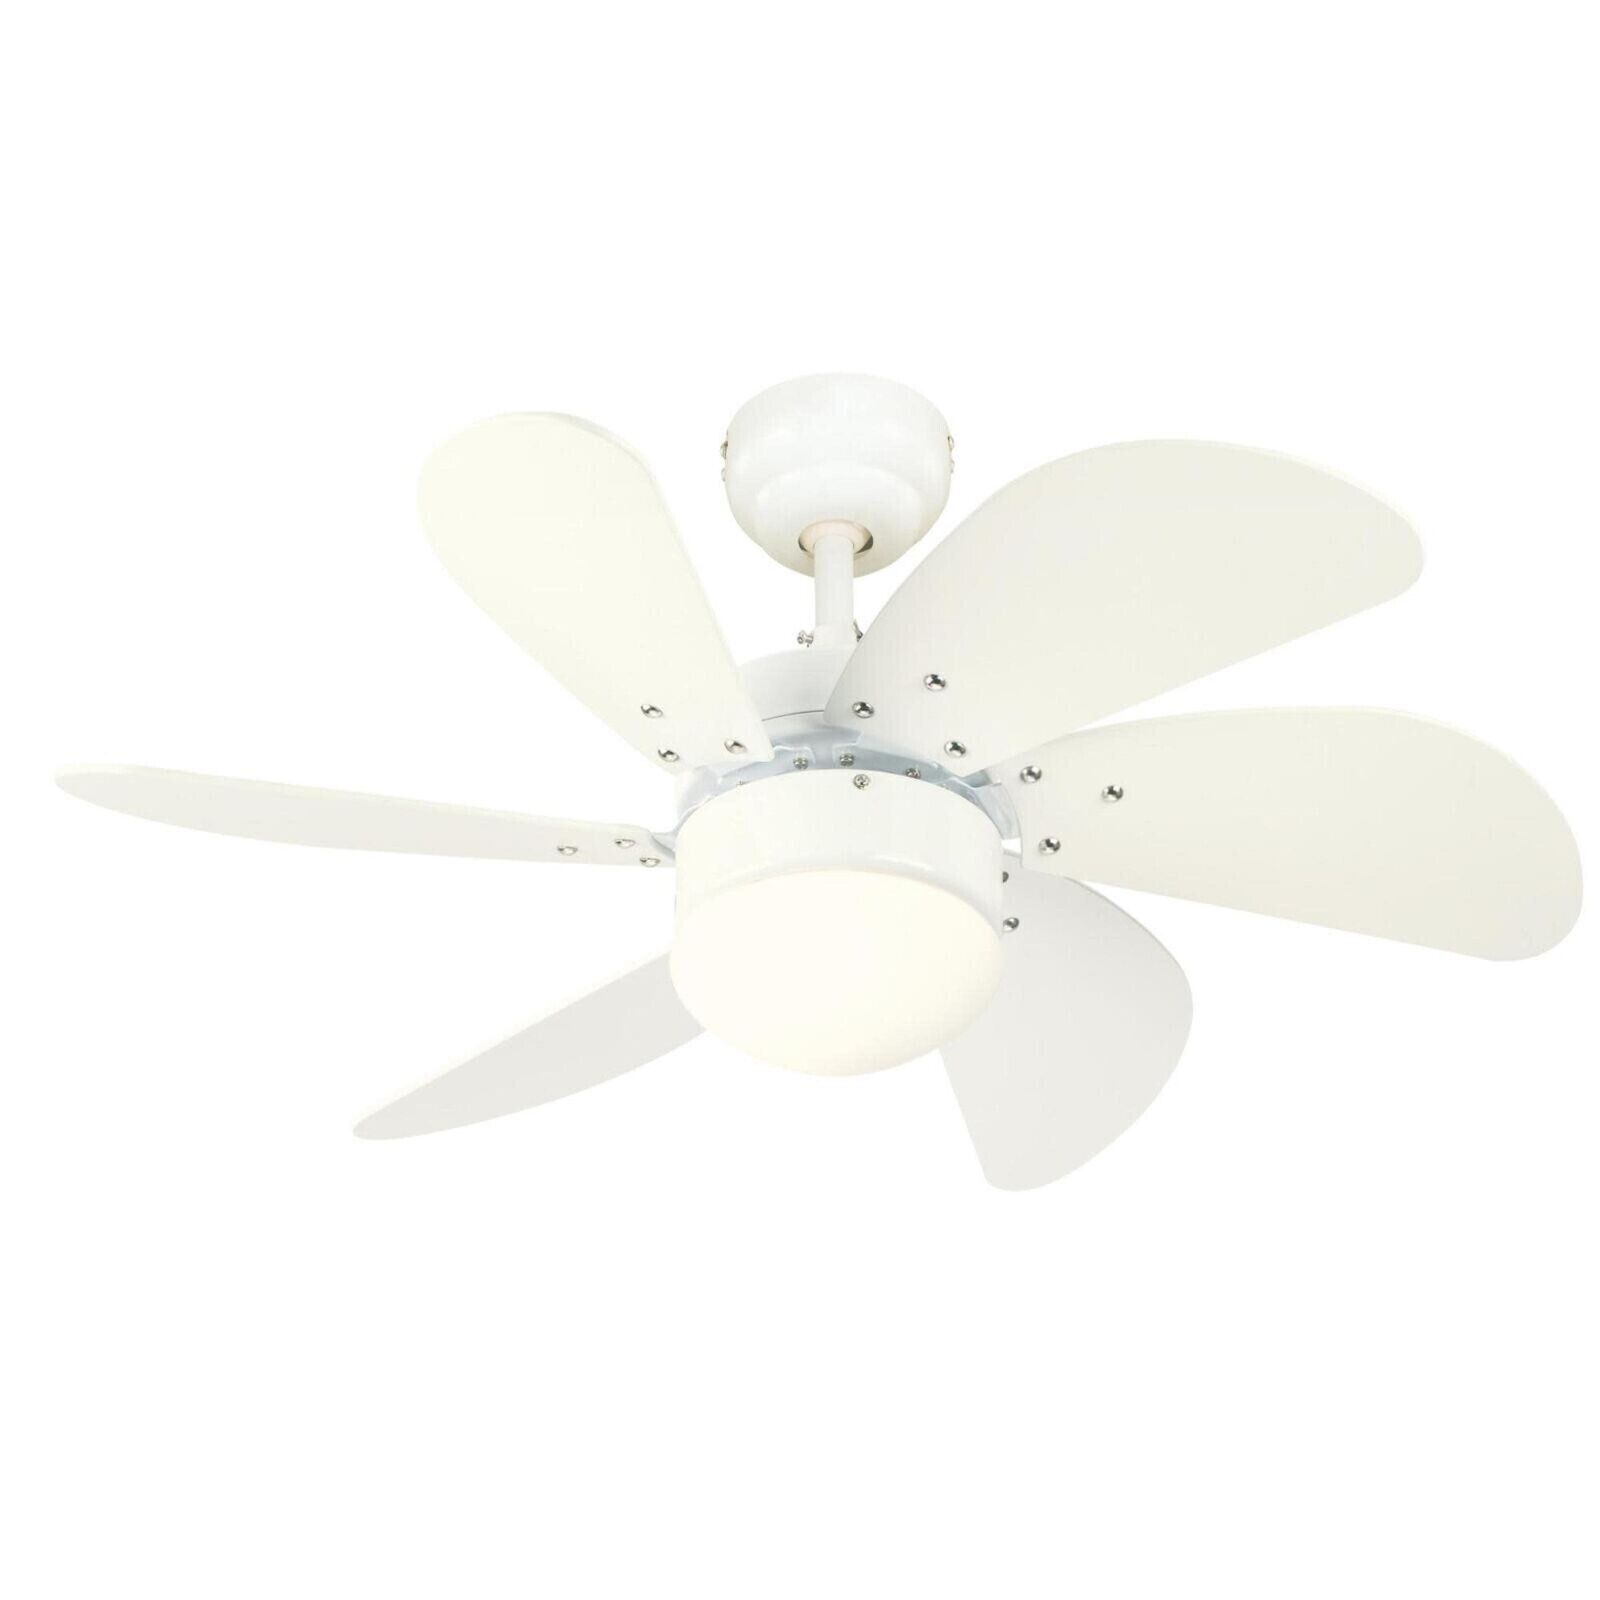 Primary image for WESTINGHOUSE 72344 TURBO SWIRL CEILING FAN, WHITE, 30'' IN.